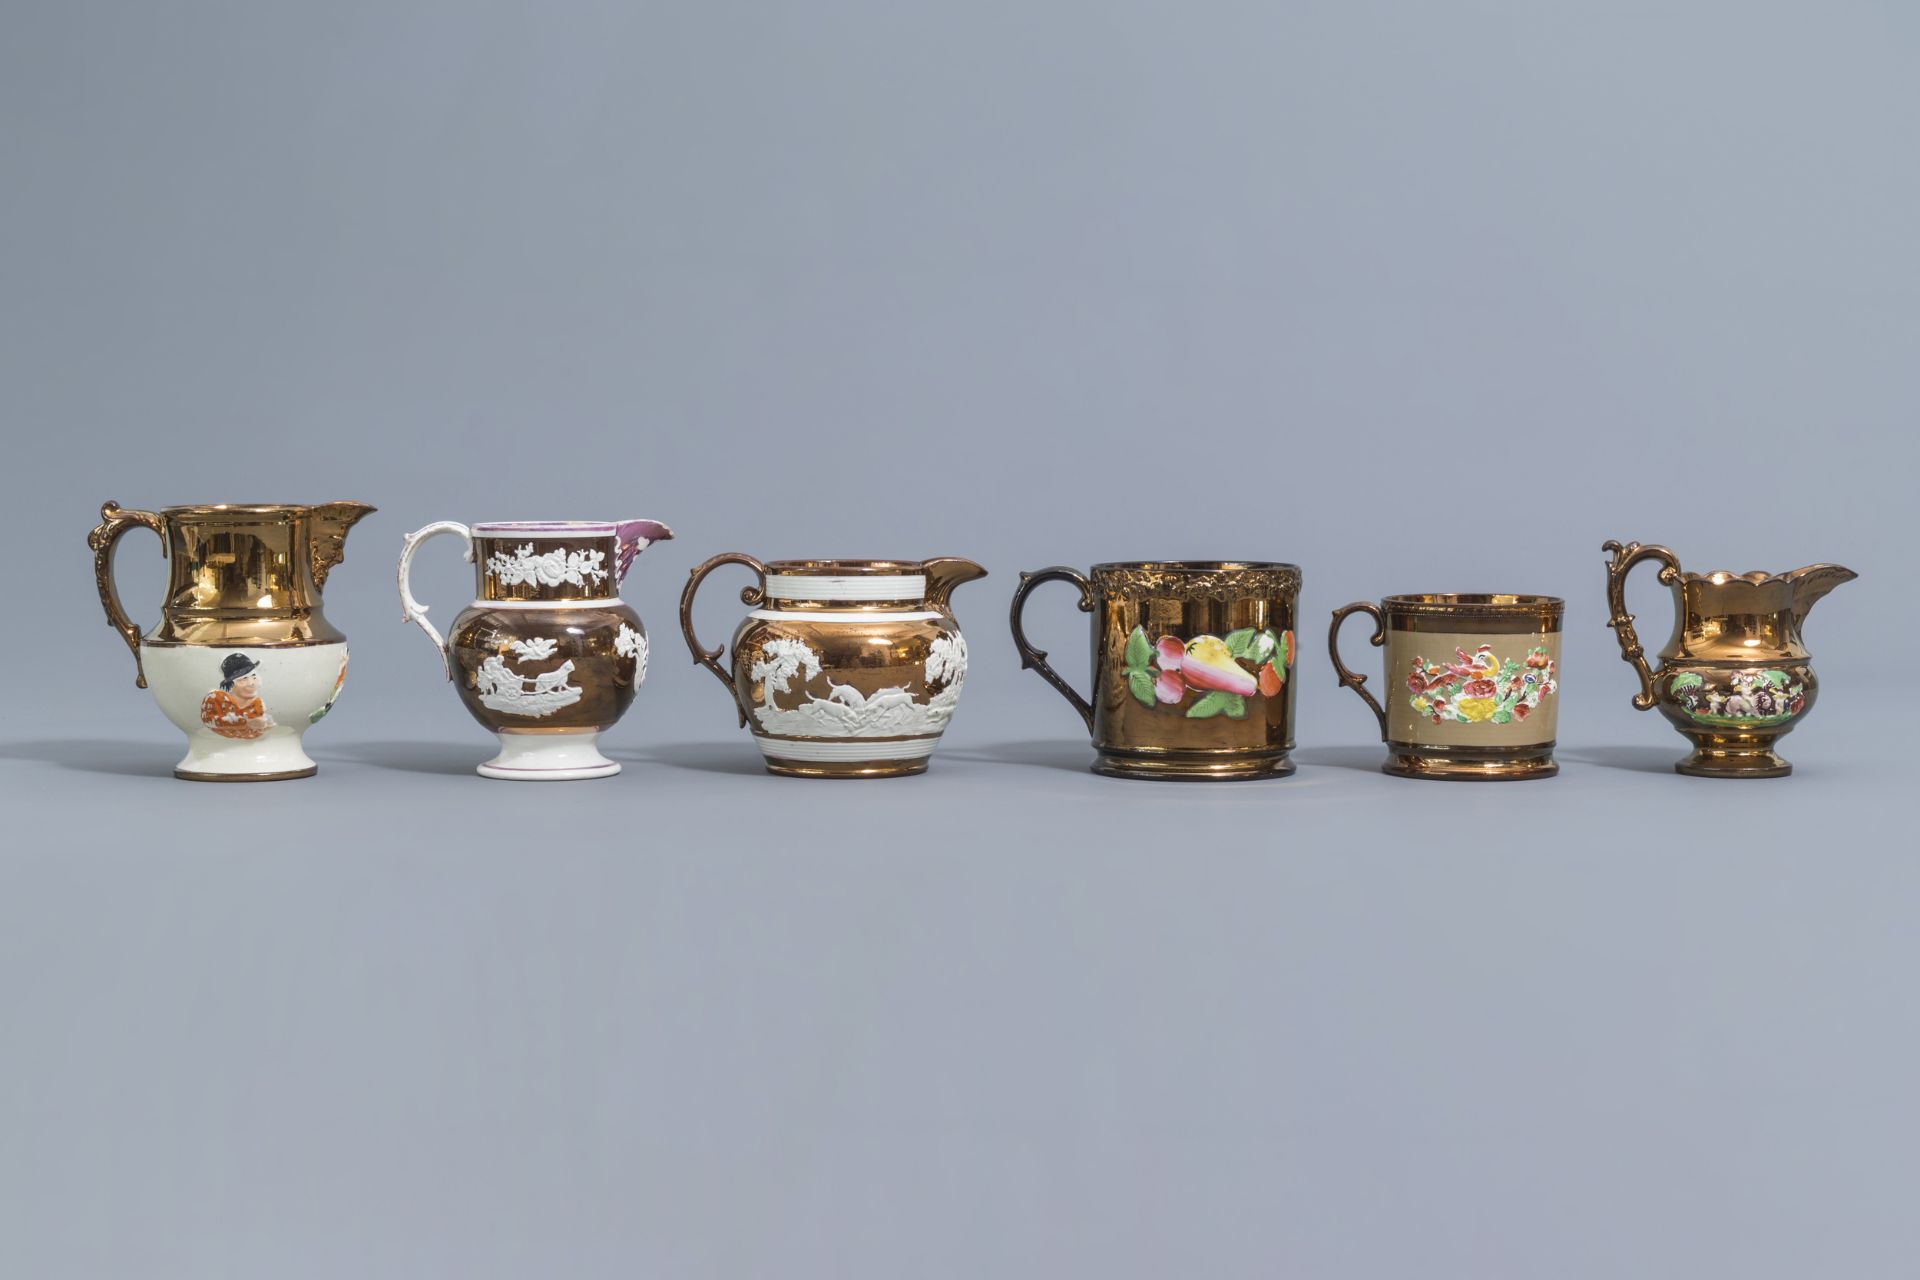 A varied collection of English lustreware items with relief design, 19th C. - Image 40 of 50